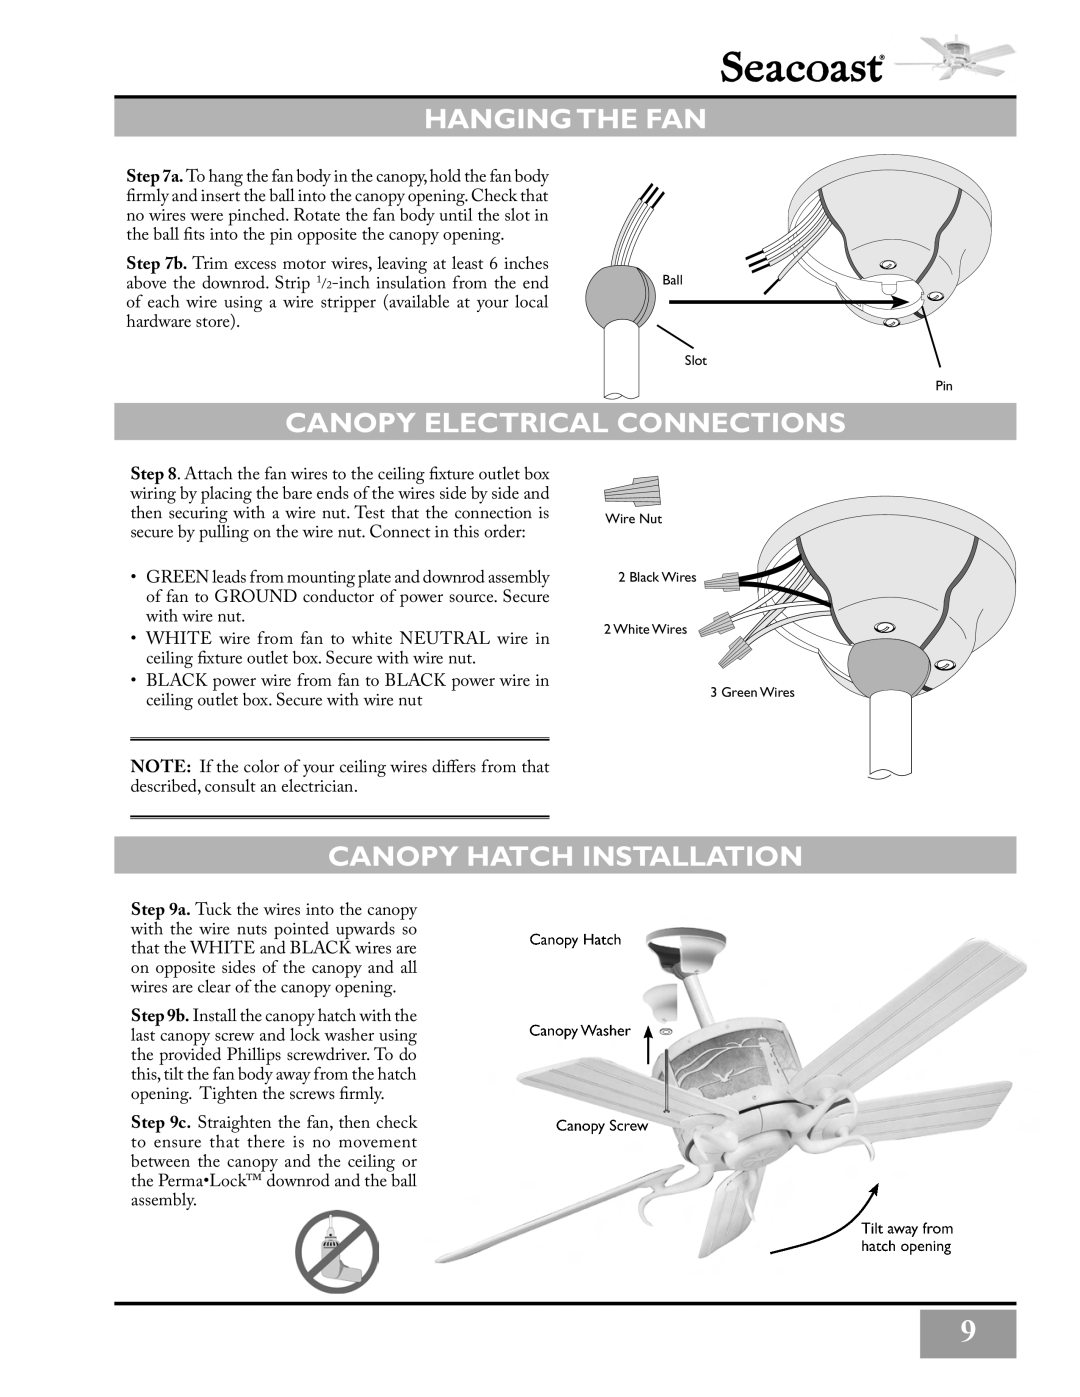 Casablanca Fan Company C3U72M owner manual Hangingthe Fan, Canopy Electrical Connections, Canopy Hatch Installation 